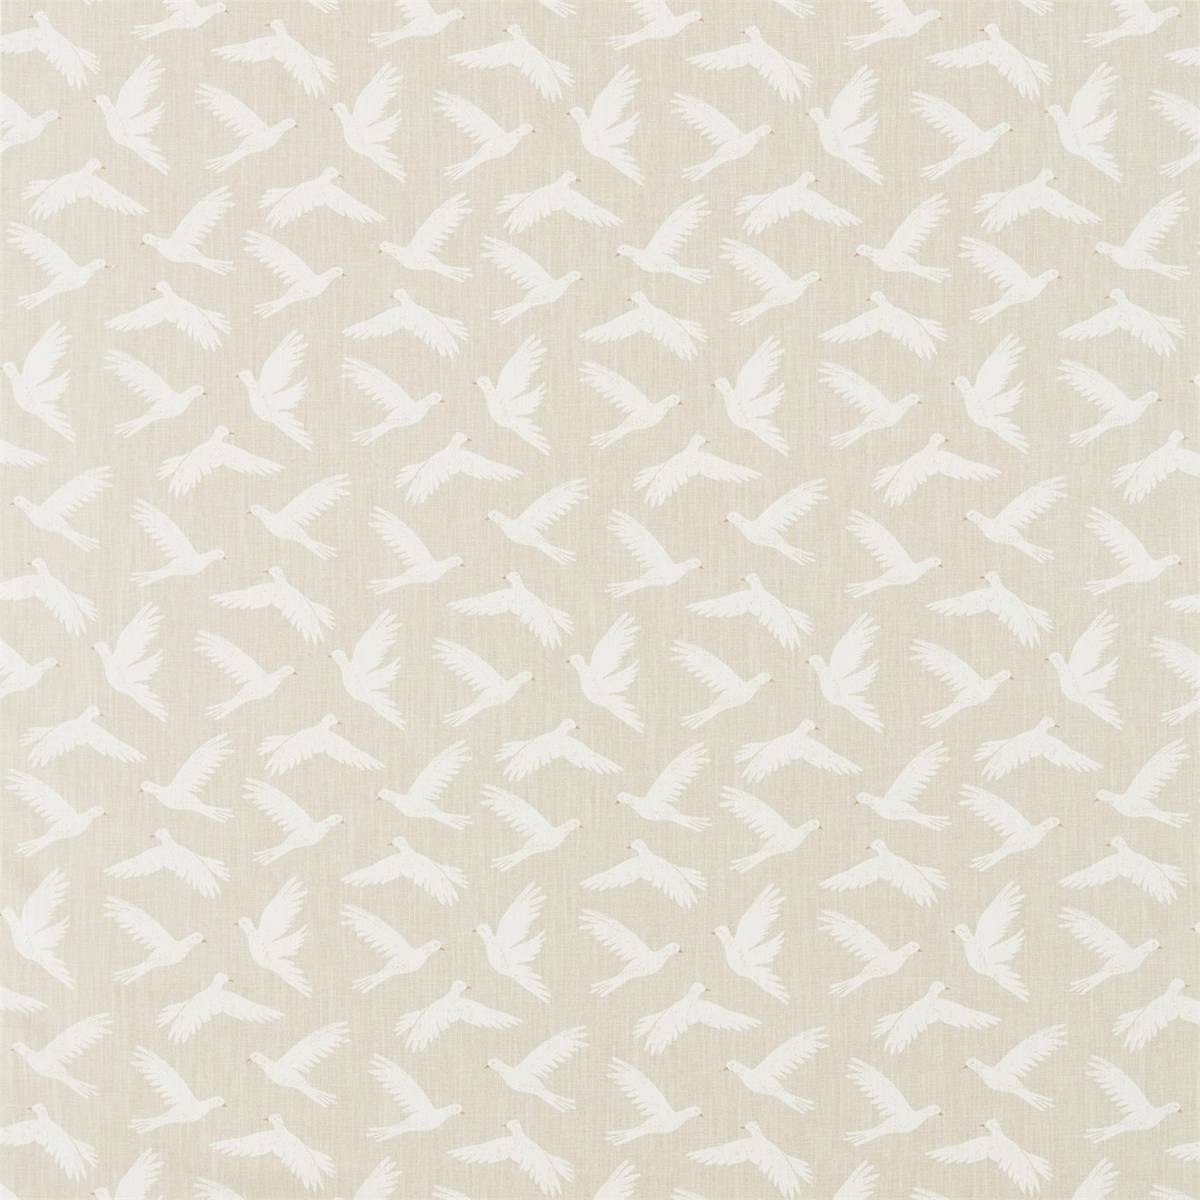 Paper Doves Linen Fabric by Sanderson